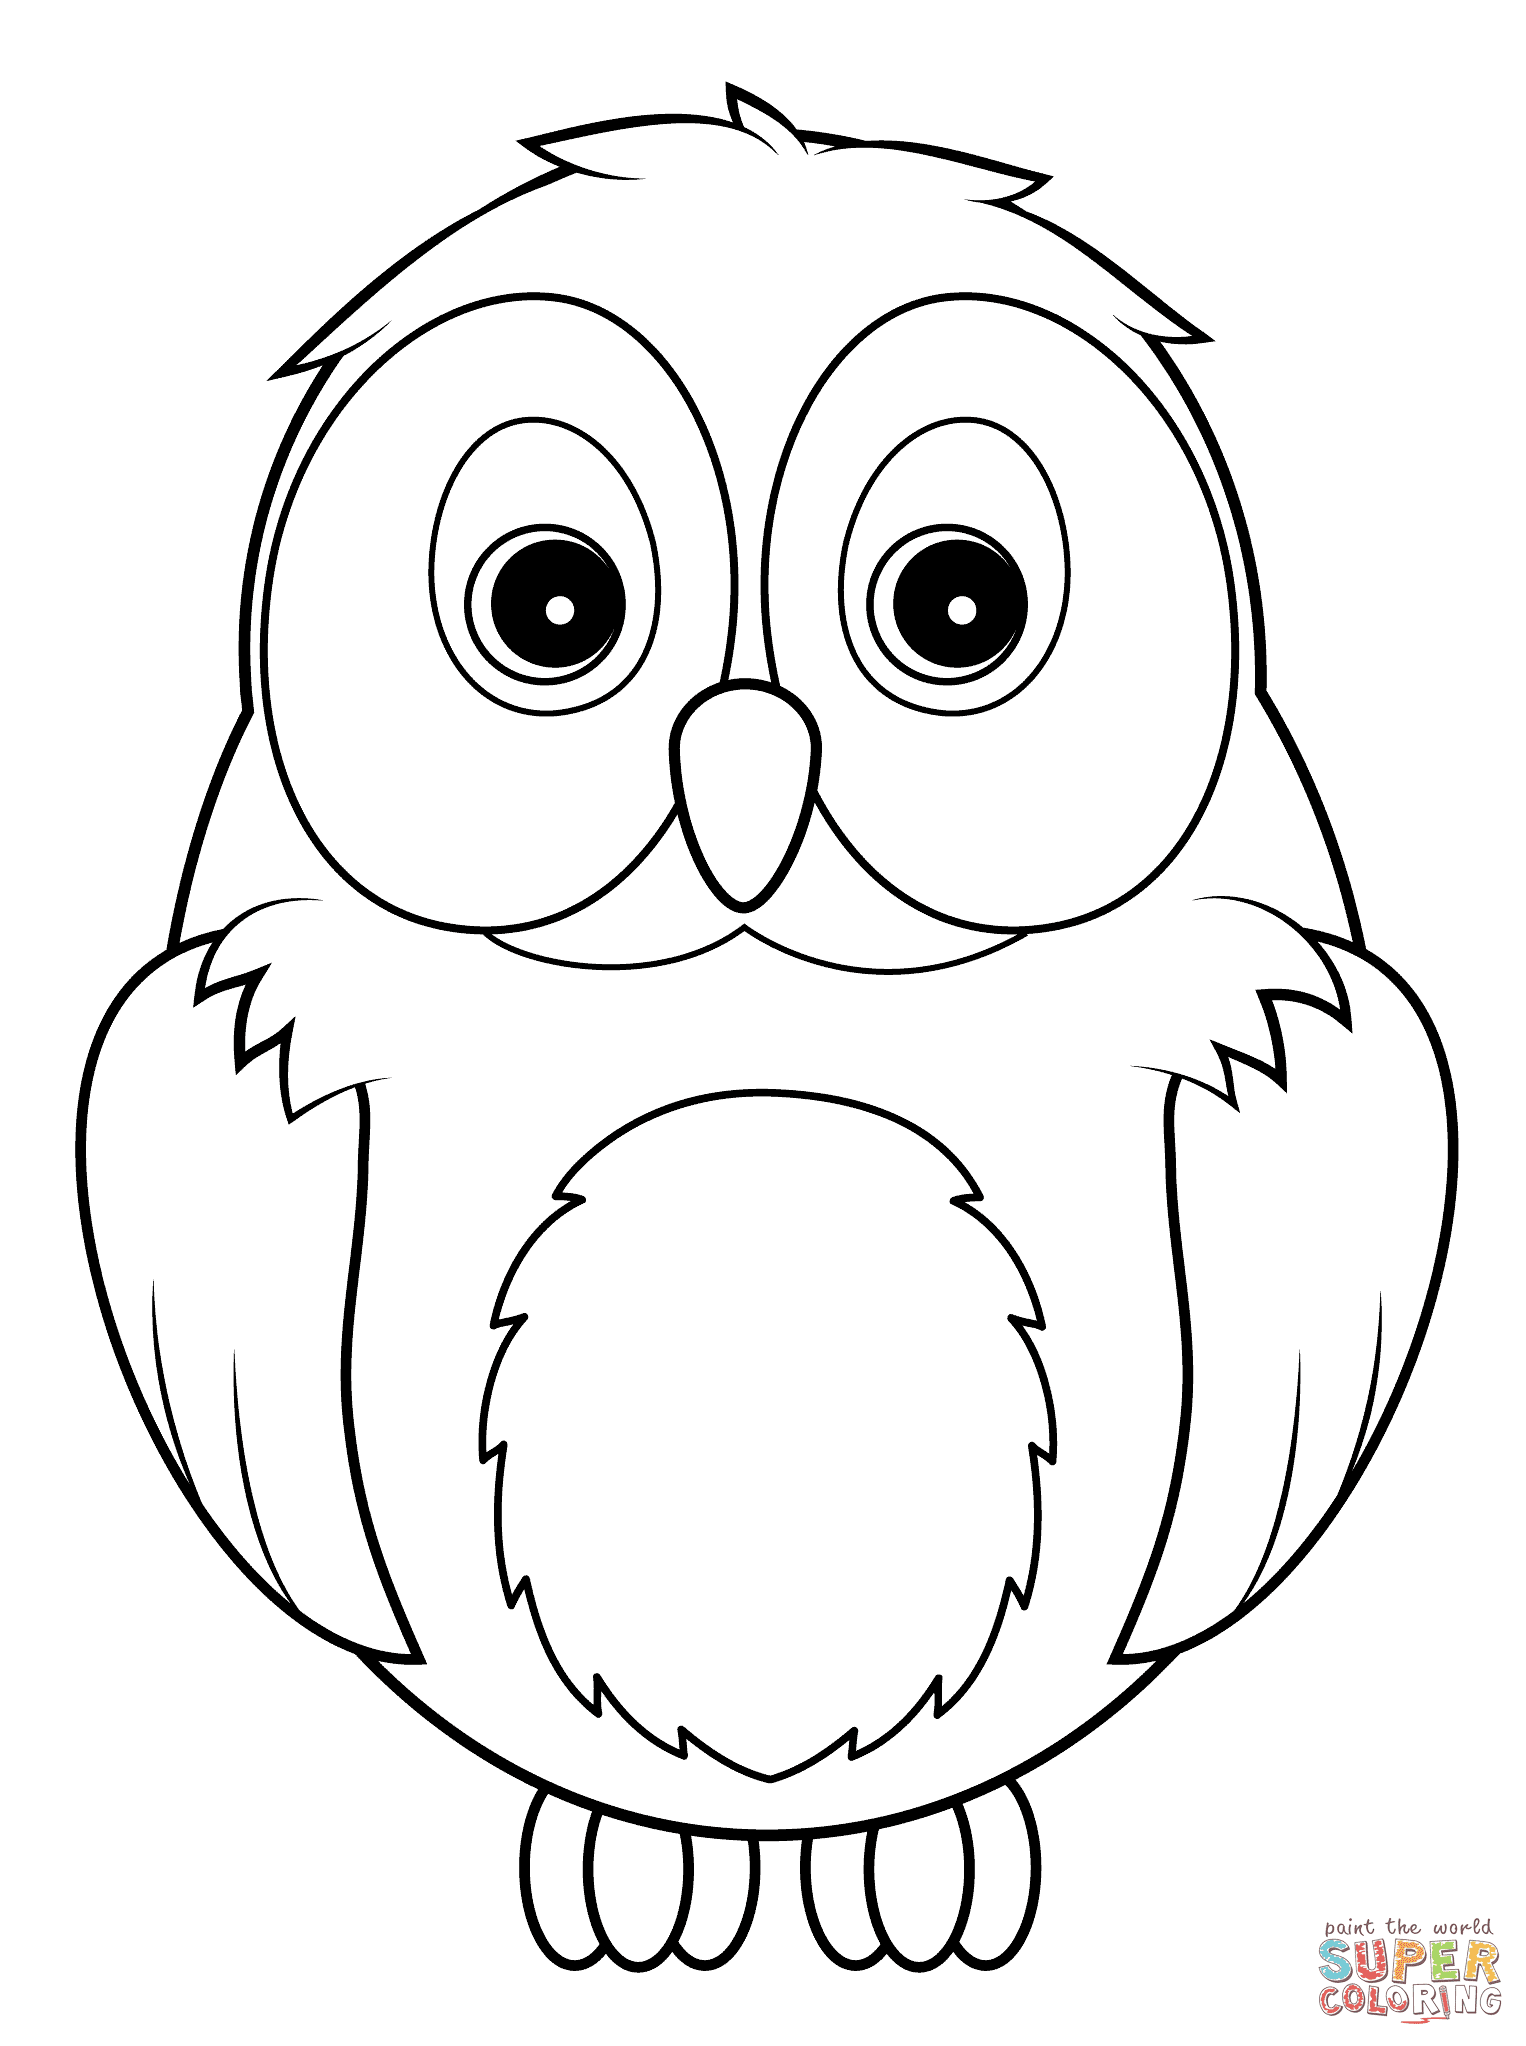 Cute Owl Coloring Pages For Kids Drawing With Crayons